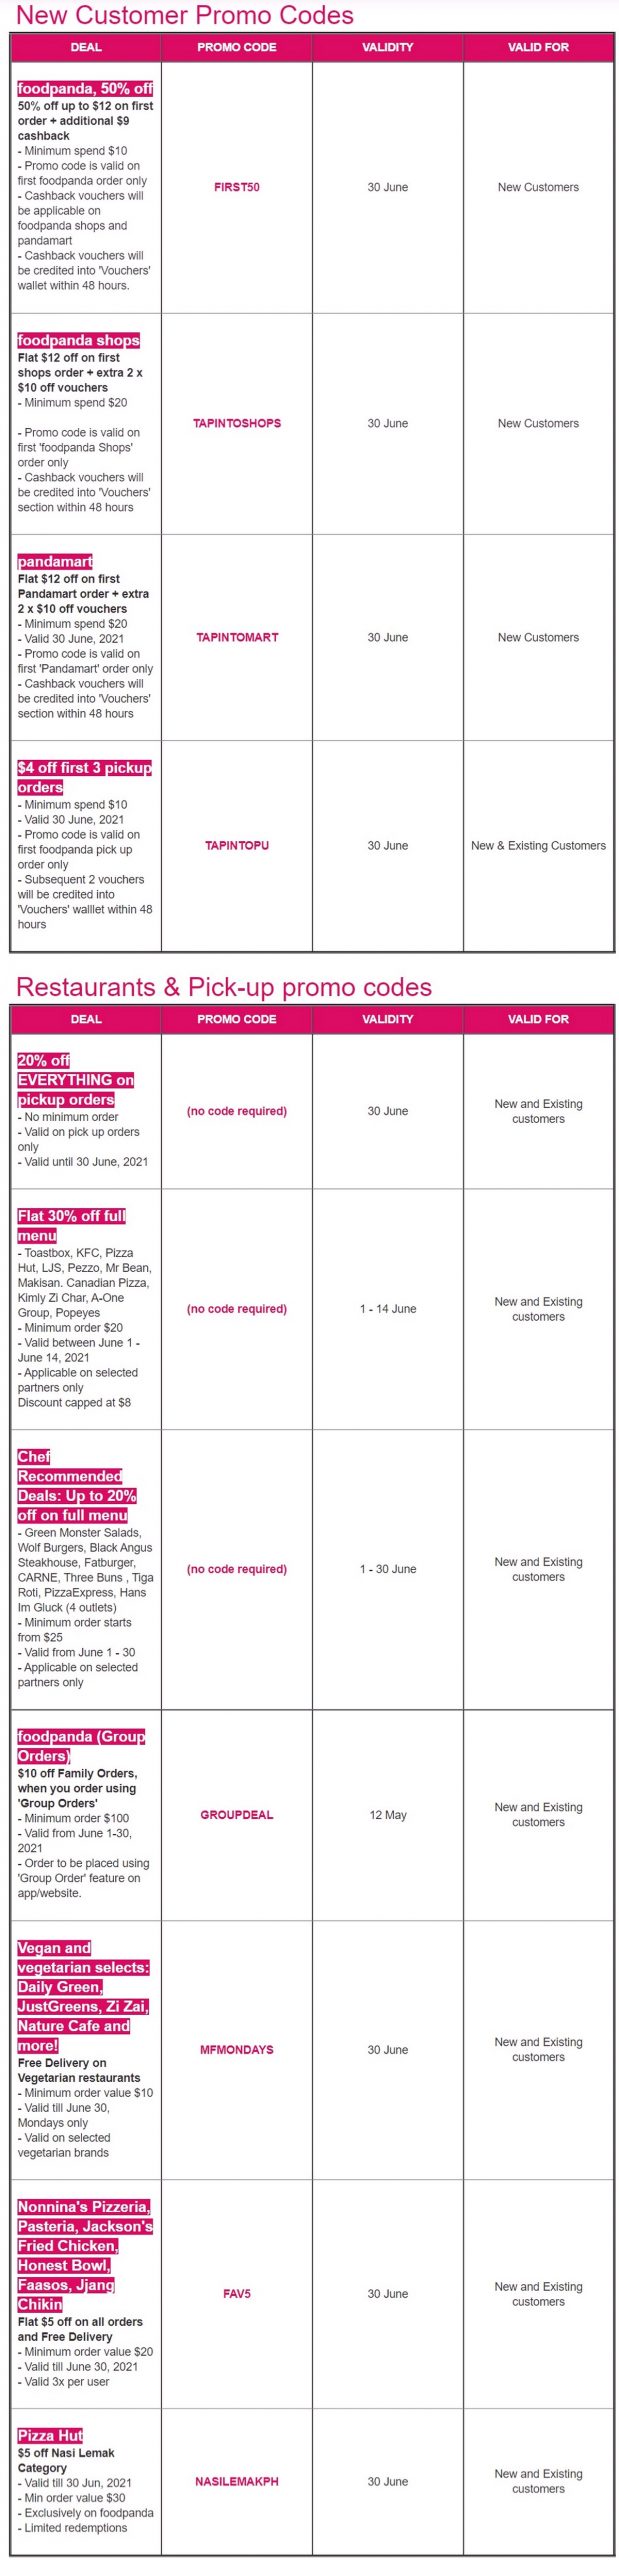 foodpanda-all-promo-codes-in-Singapore-June-2021-foodpanda-scaled Now till 30 Jun 2021: FoodPanda S'pore Launches 10 New Promo Codes! Tips to Save More While Ordering Delivery in Singapore [Latest Update]